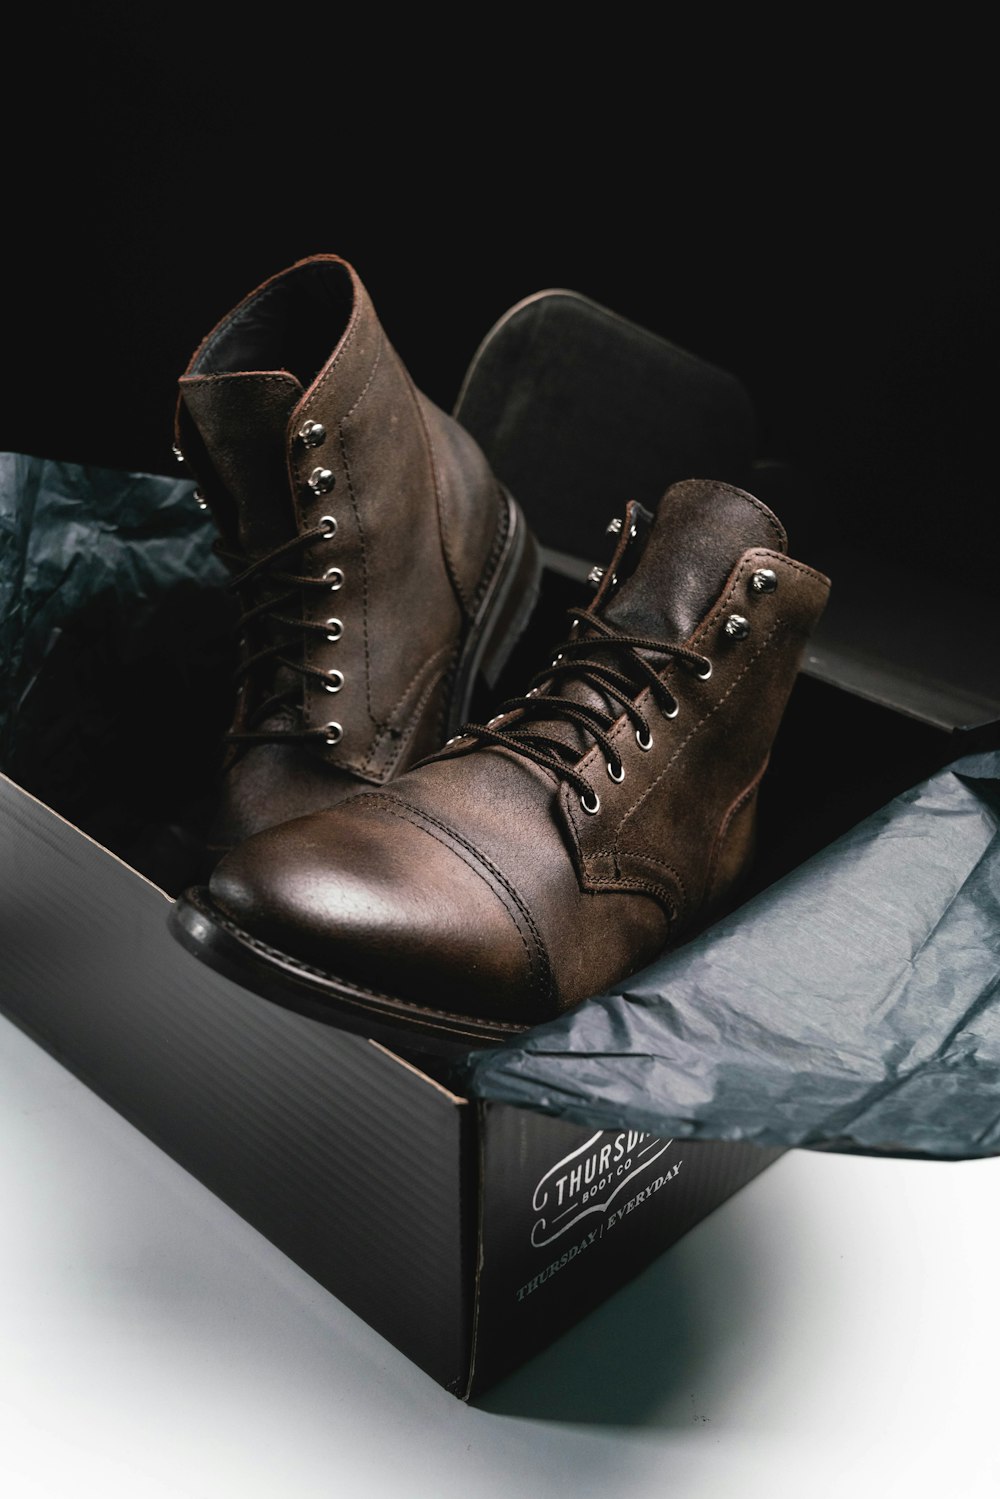 brown leather boots on black box